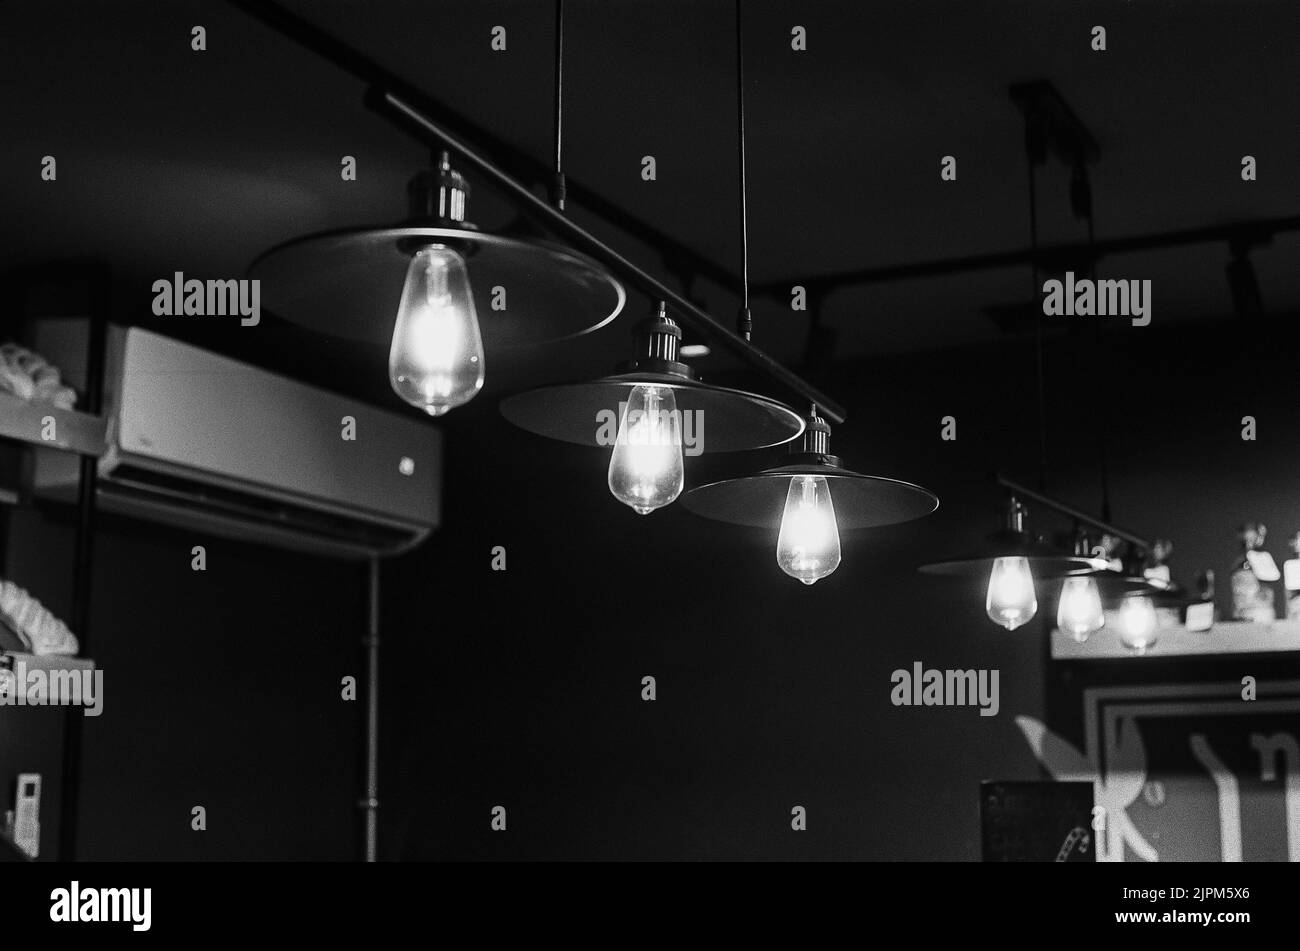 A grayscale shot of lamps on the ceiling in a cafe with lights on Stock Photo